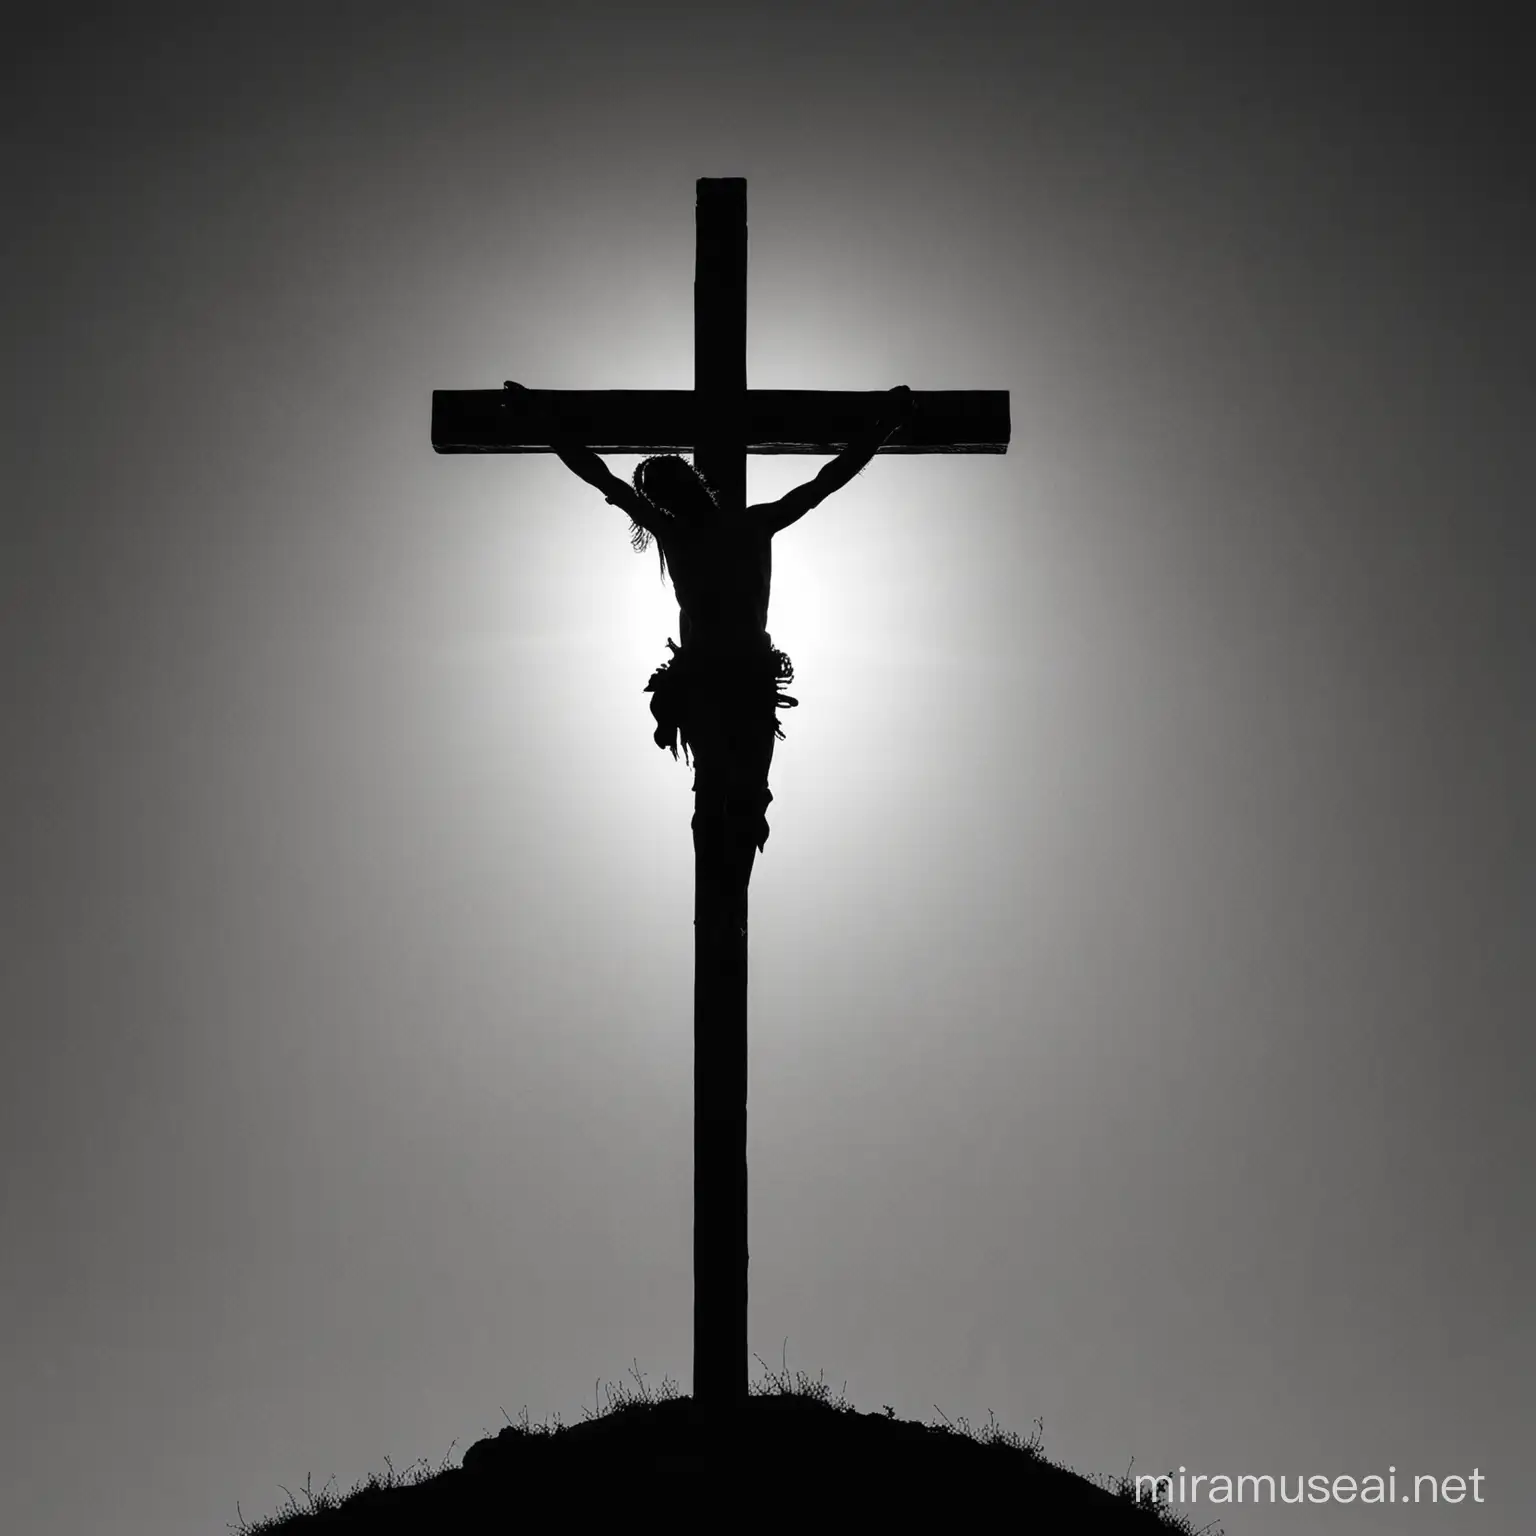 Jesus on the cross as a sillouette, 2 crosses next to his cross